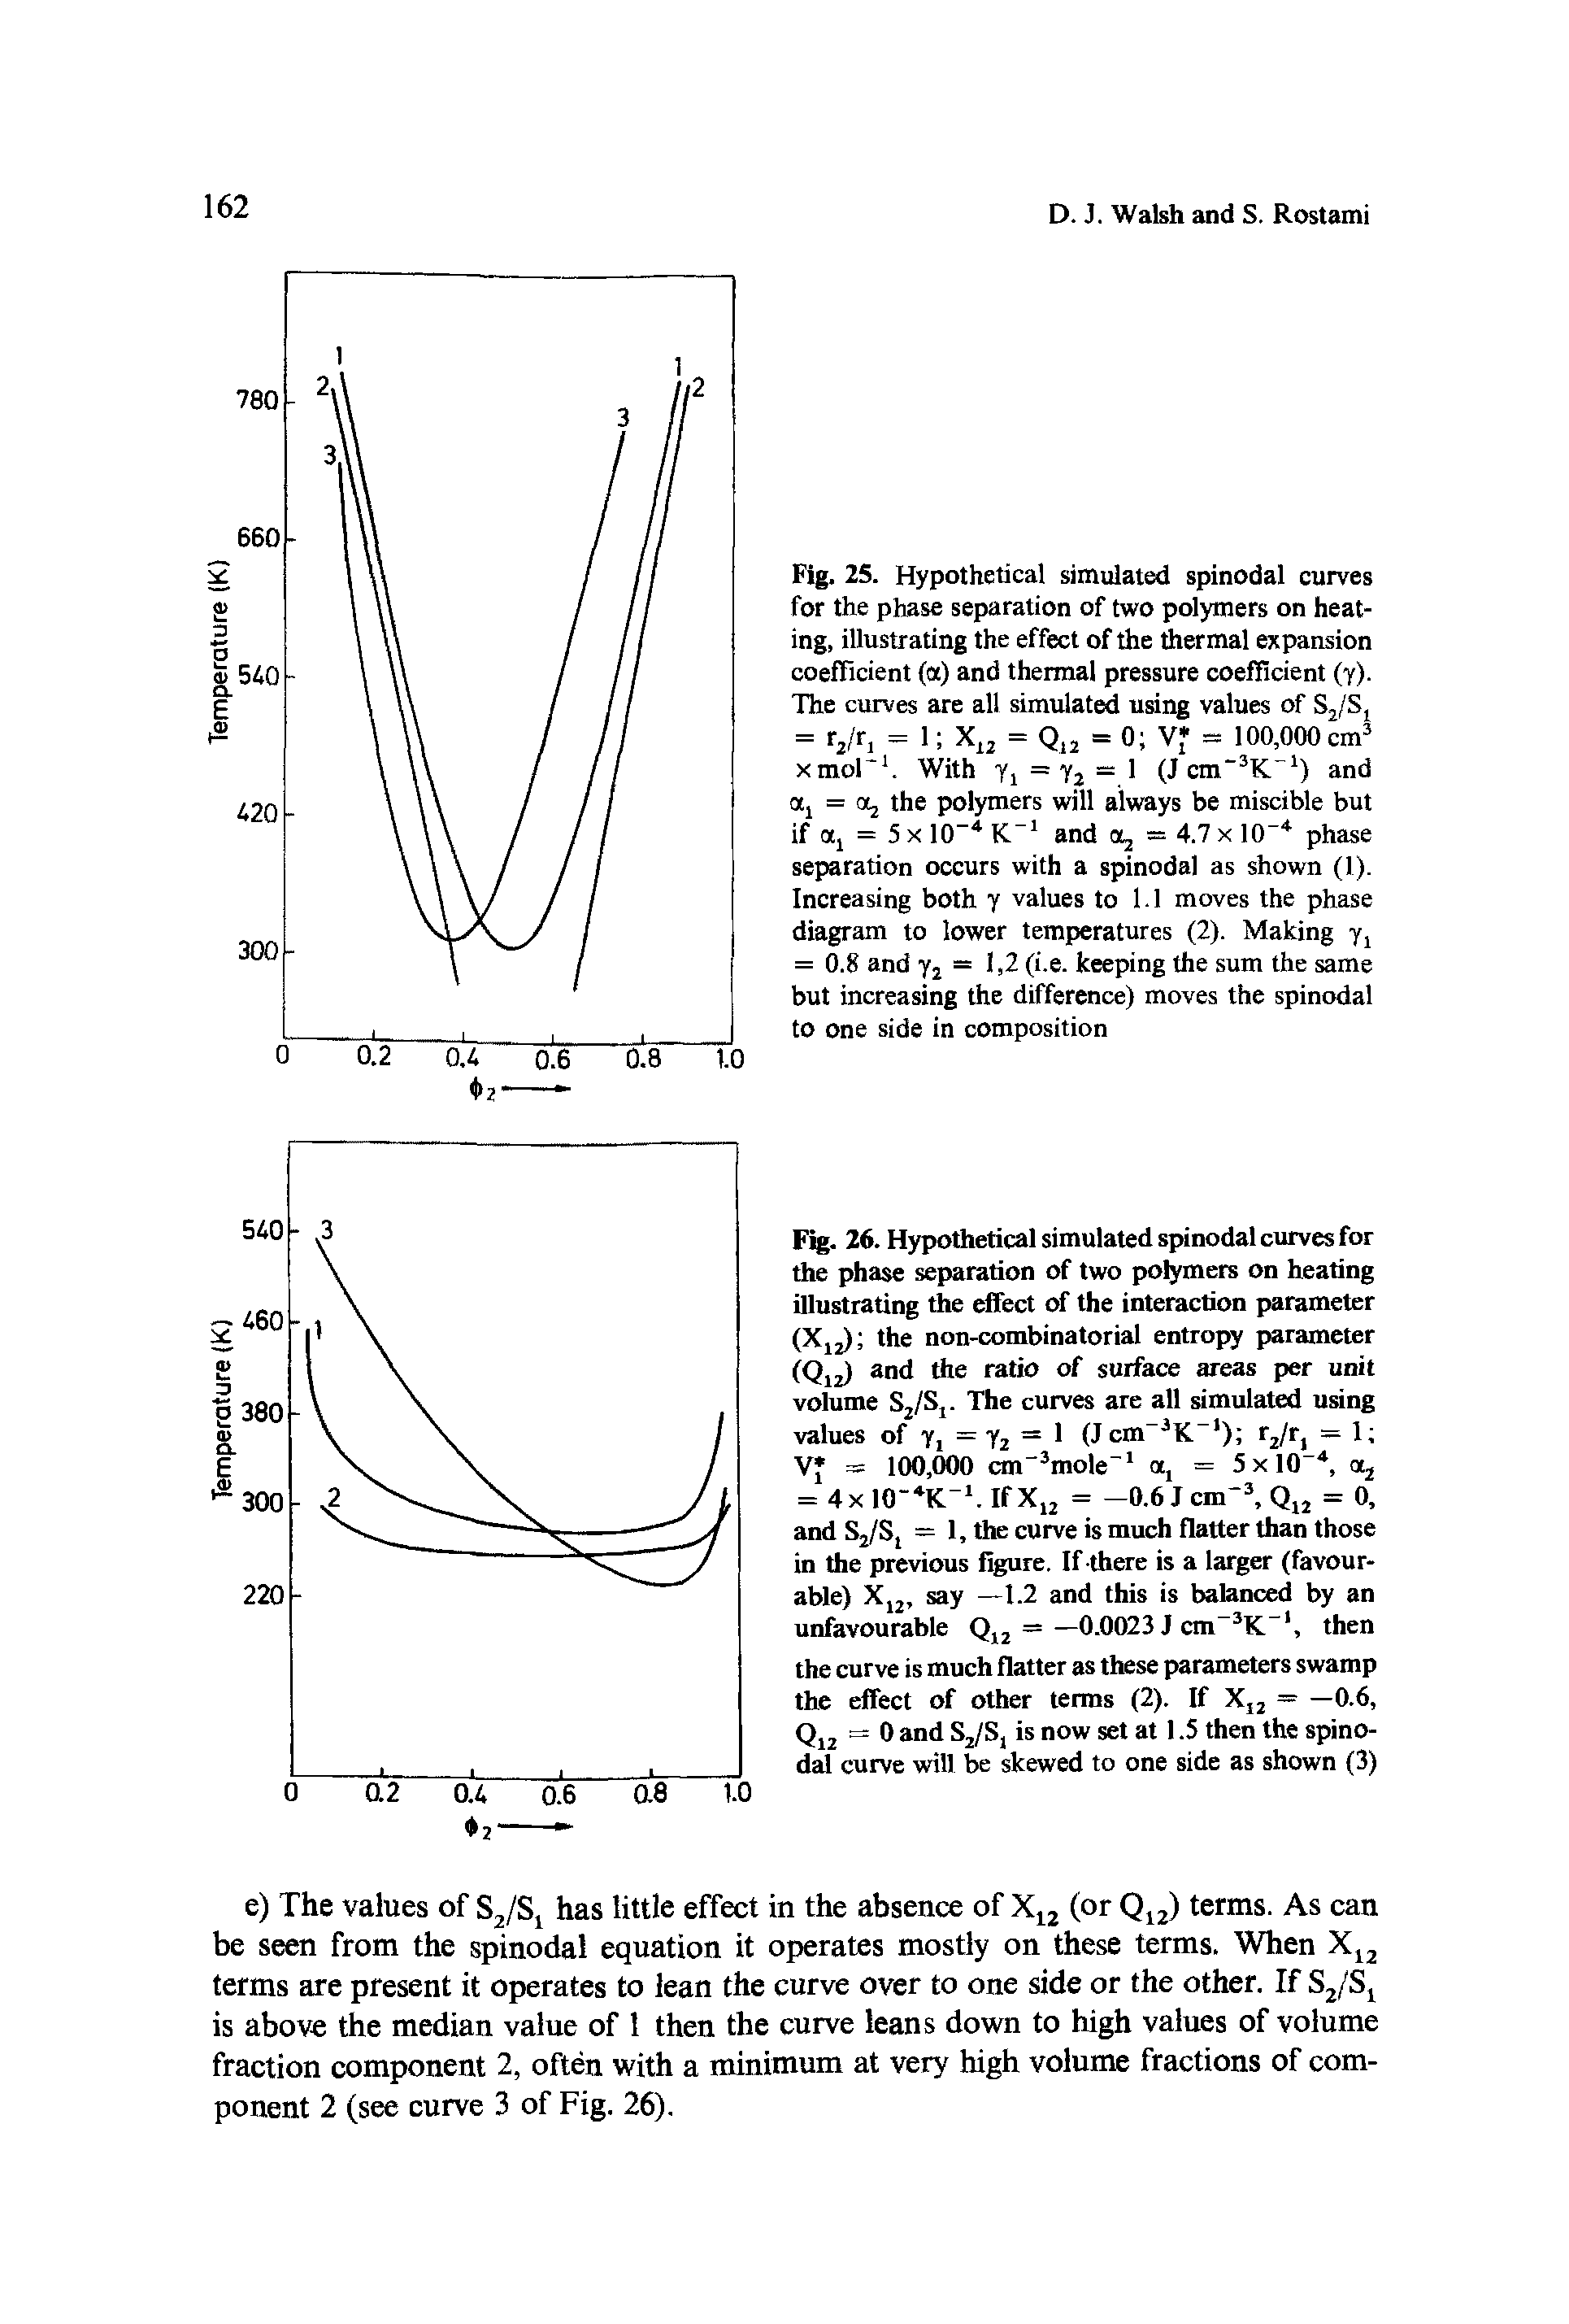 Fig. 26. Hypothetical simulated spinodal curves for the phase separation of two polymers on heating illustrating the effect of the interaction parameter (Xjj) the non-combinatorial entropy parameter (Qjj) and die ratio of surface areas per unit volume Sj/Sj. The curves are all simulated using values of y, = Yz = 1 (Jcm" K" ) tj/r, - 1 VJ = 100,000 cm" mole" a, = 5x10", 04 = 4x I0" K" . If X,j = —0.6 J cm", Qjj = 0, and Sj/S, = 1, the curve is much flatter than those in the previous f ure. If there is a larger (favourable) X,j, say —1.2 and this is balanced by an unfavourable —0.0023 J cm K., then...